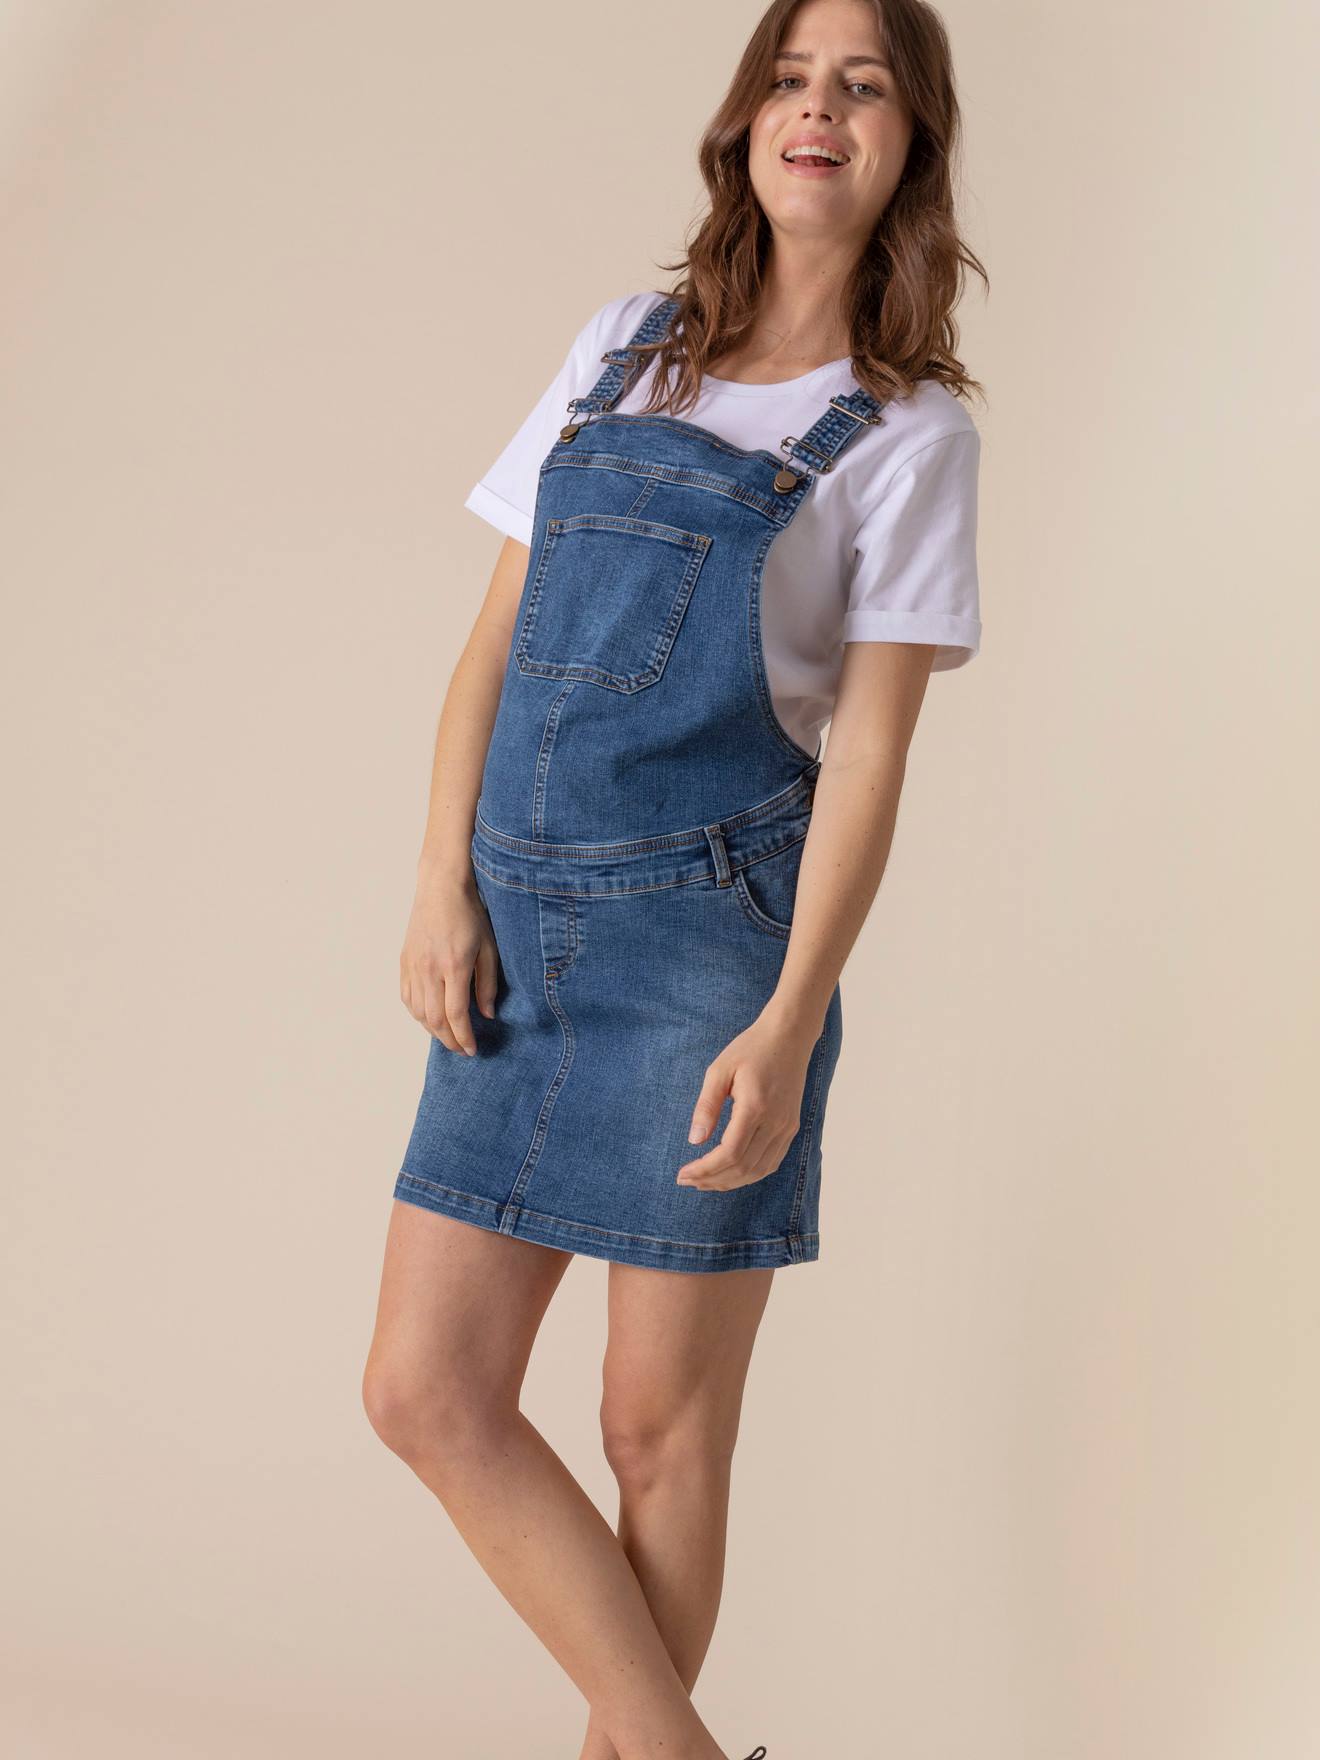 Top + Corduroy Dungaree Dress Outfit for Girls - night blue, Girls